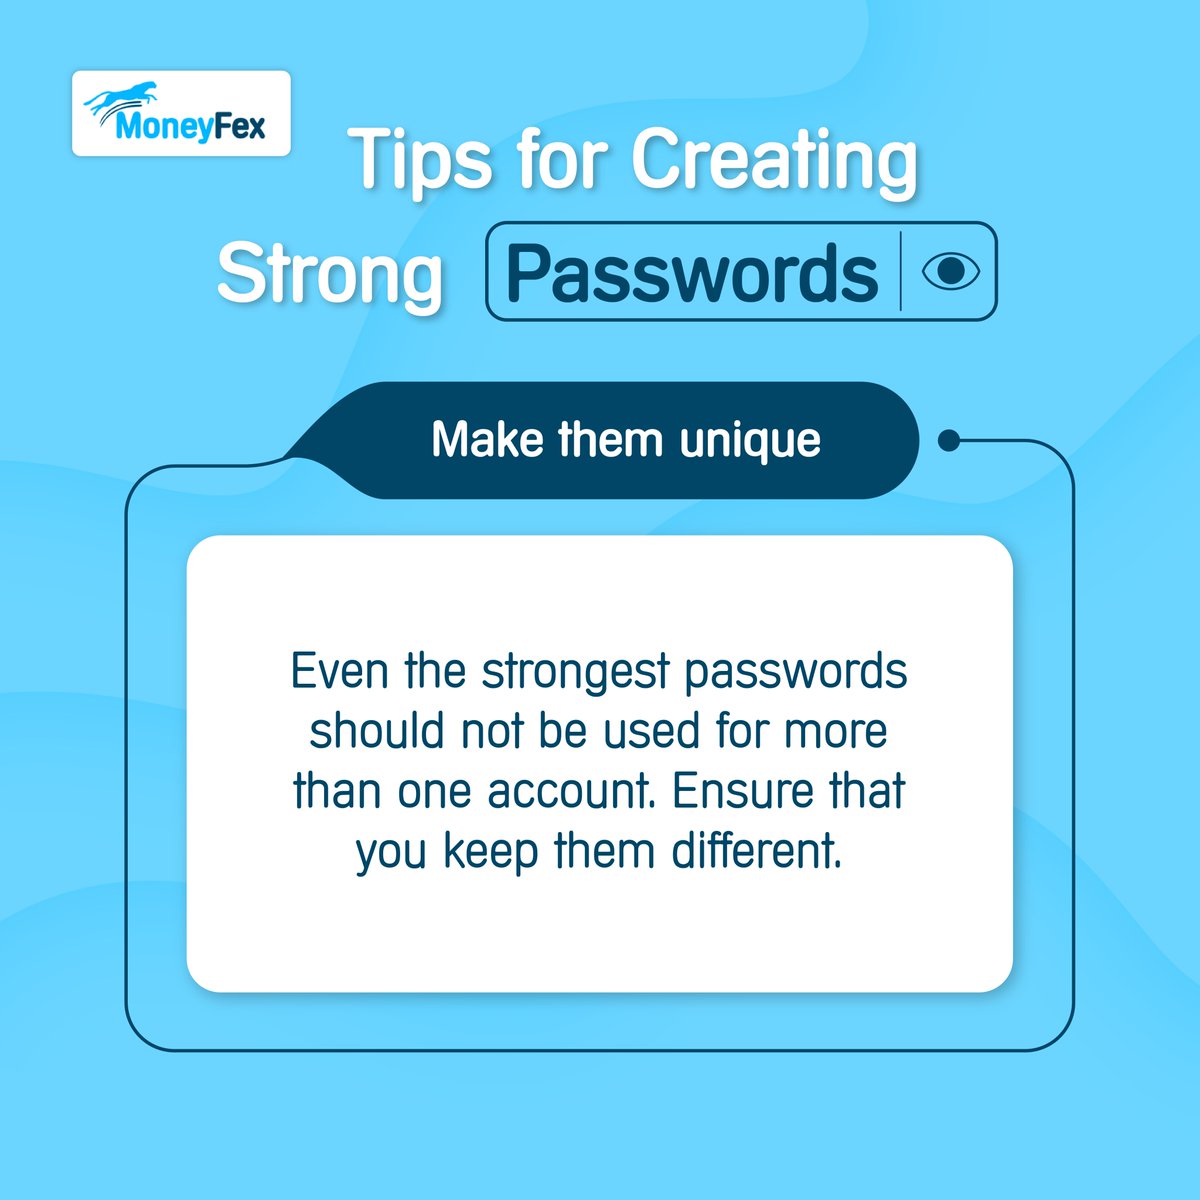 If you use the same password on multiple platforms, then you need to change that habit right now. You must keep different passwords for different platforms in order to stay safe.👨‍💻🔒

#OnlineSafety #moneyfex #fintech #technology #currencyexchange #africa